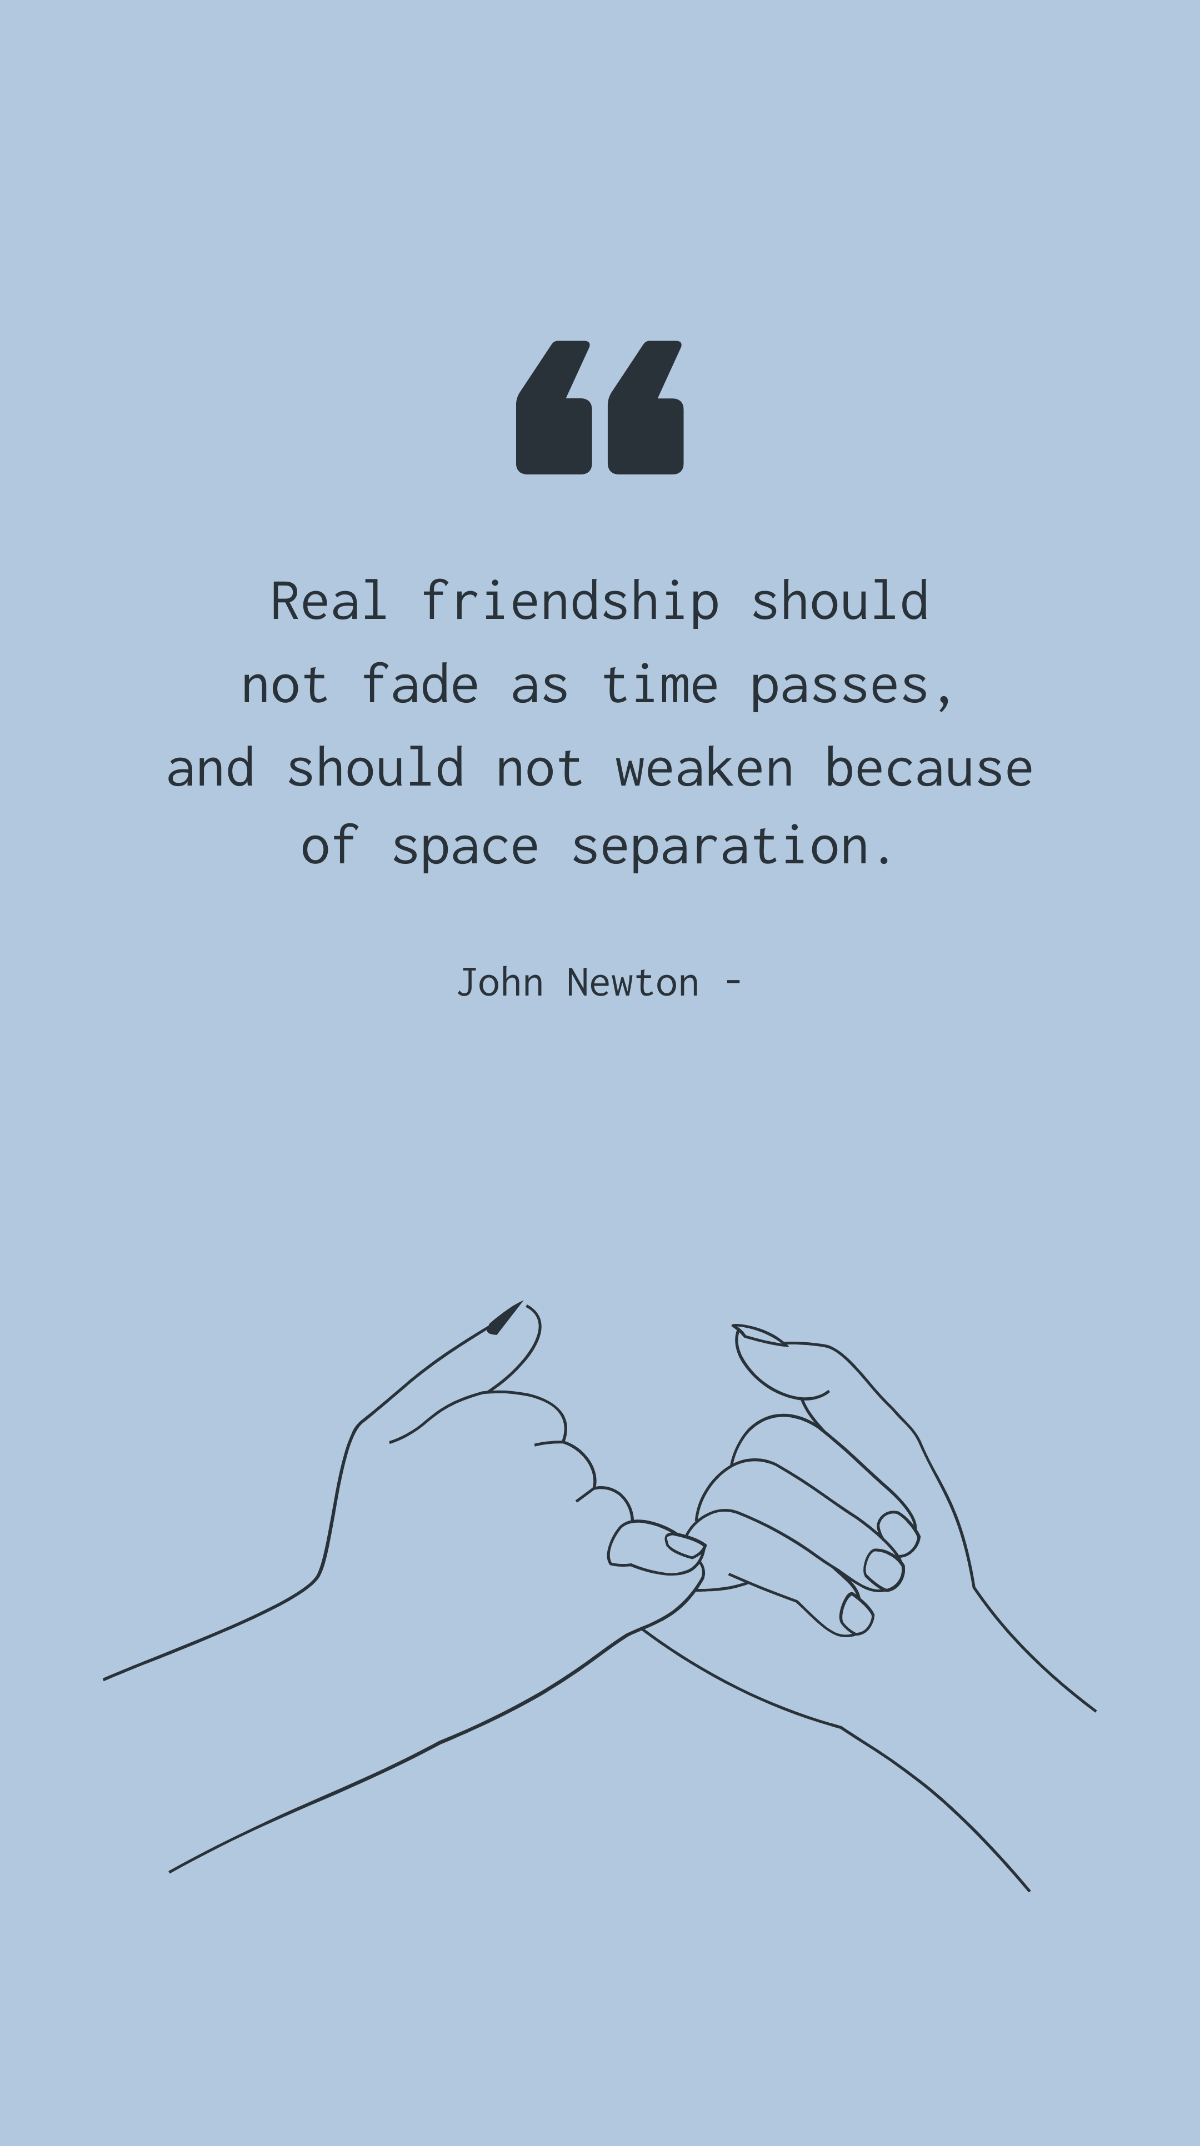 John Newton - Real friendship should not fade as time passes, and should not weaken because of space separation. Template